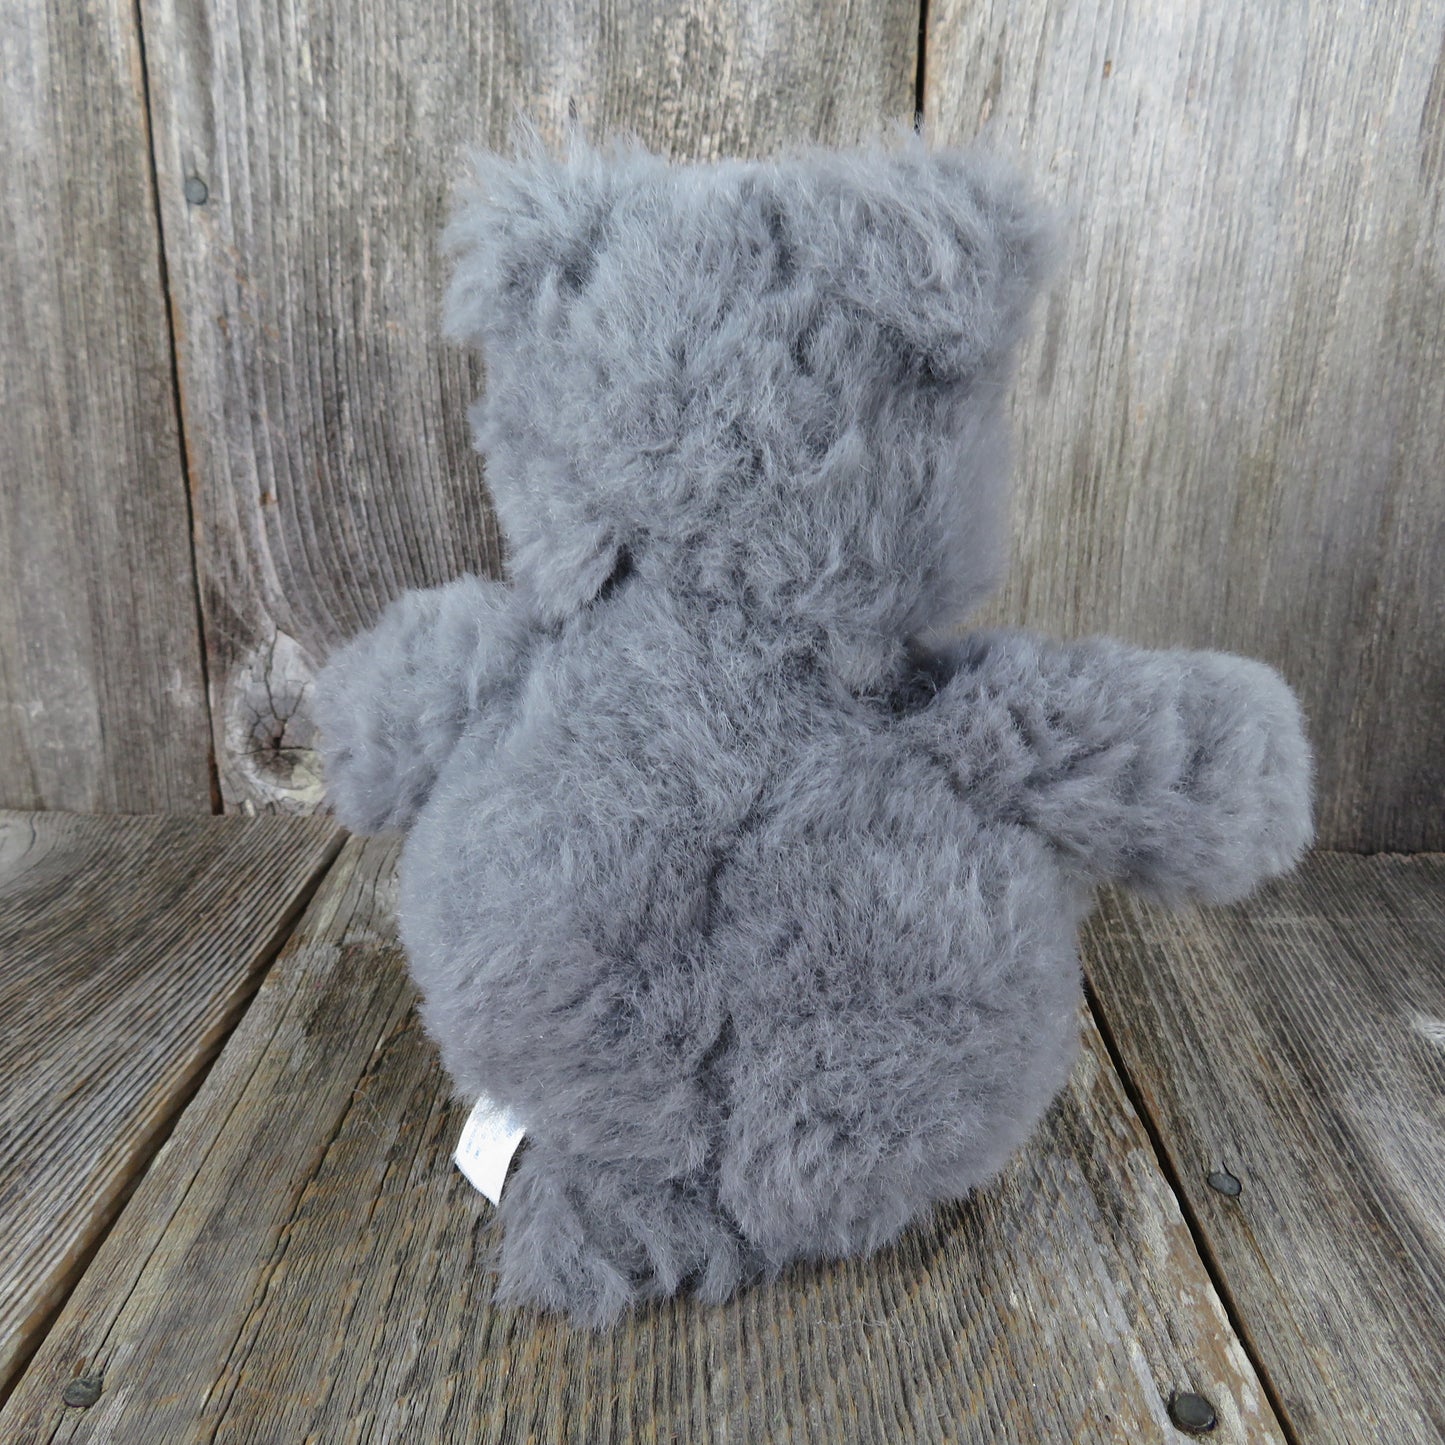 Vintage Teddy Bear Plush Fuzzy Stuffed Animal Grey Stitched Pink Nose Gray Blue Feet Mouse TB Trading